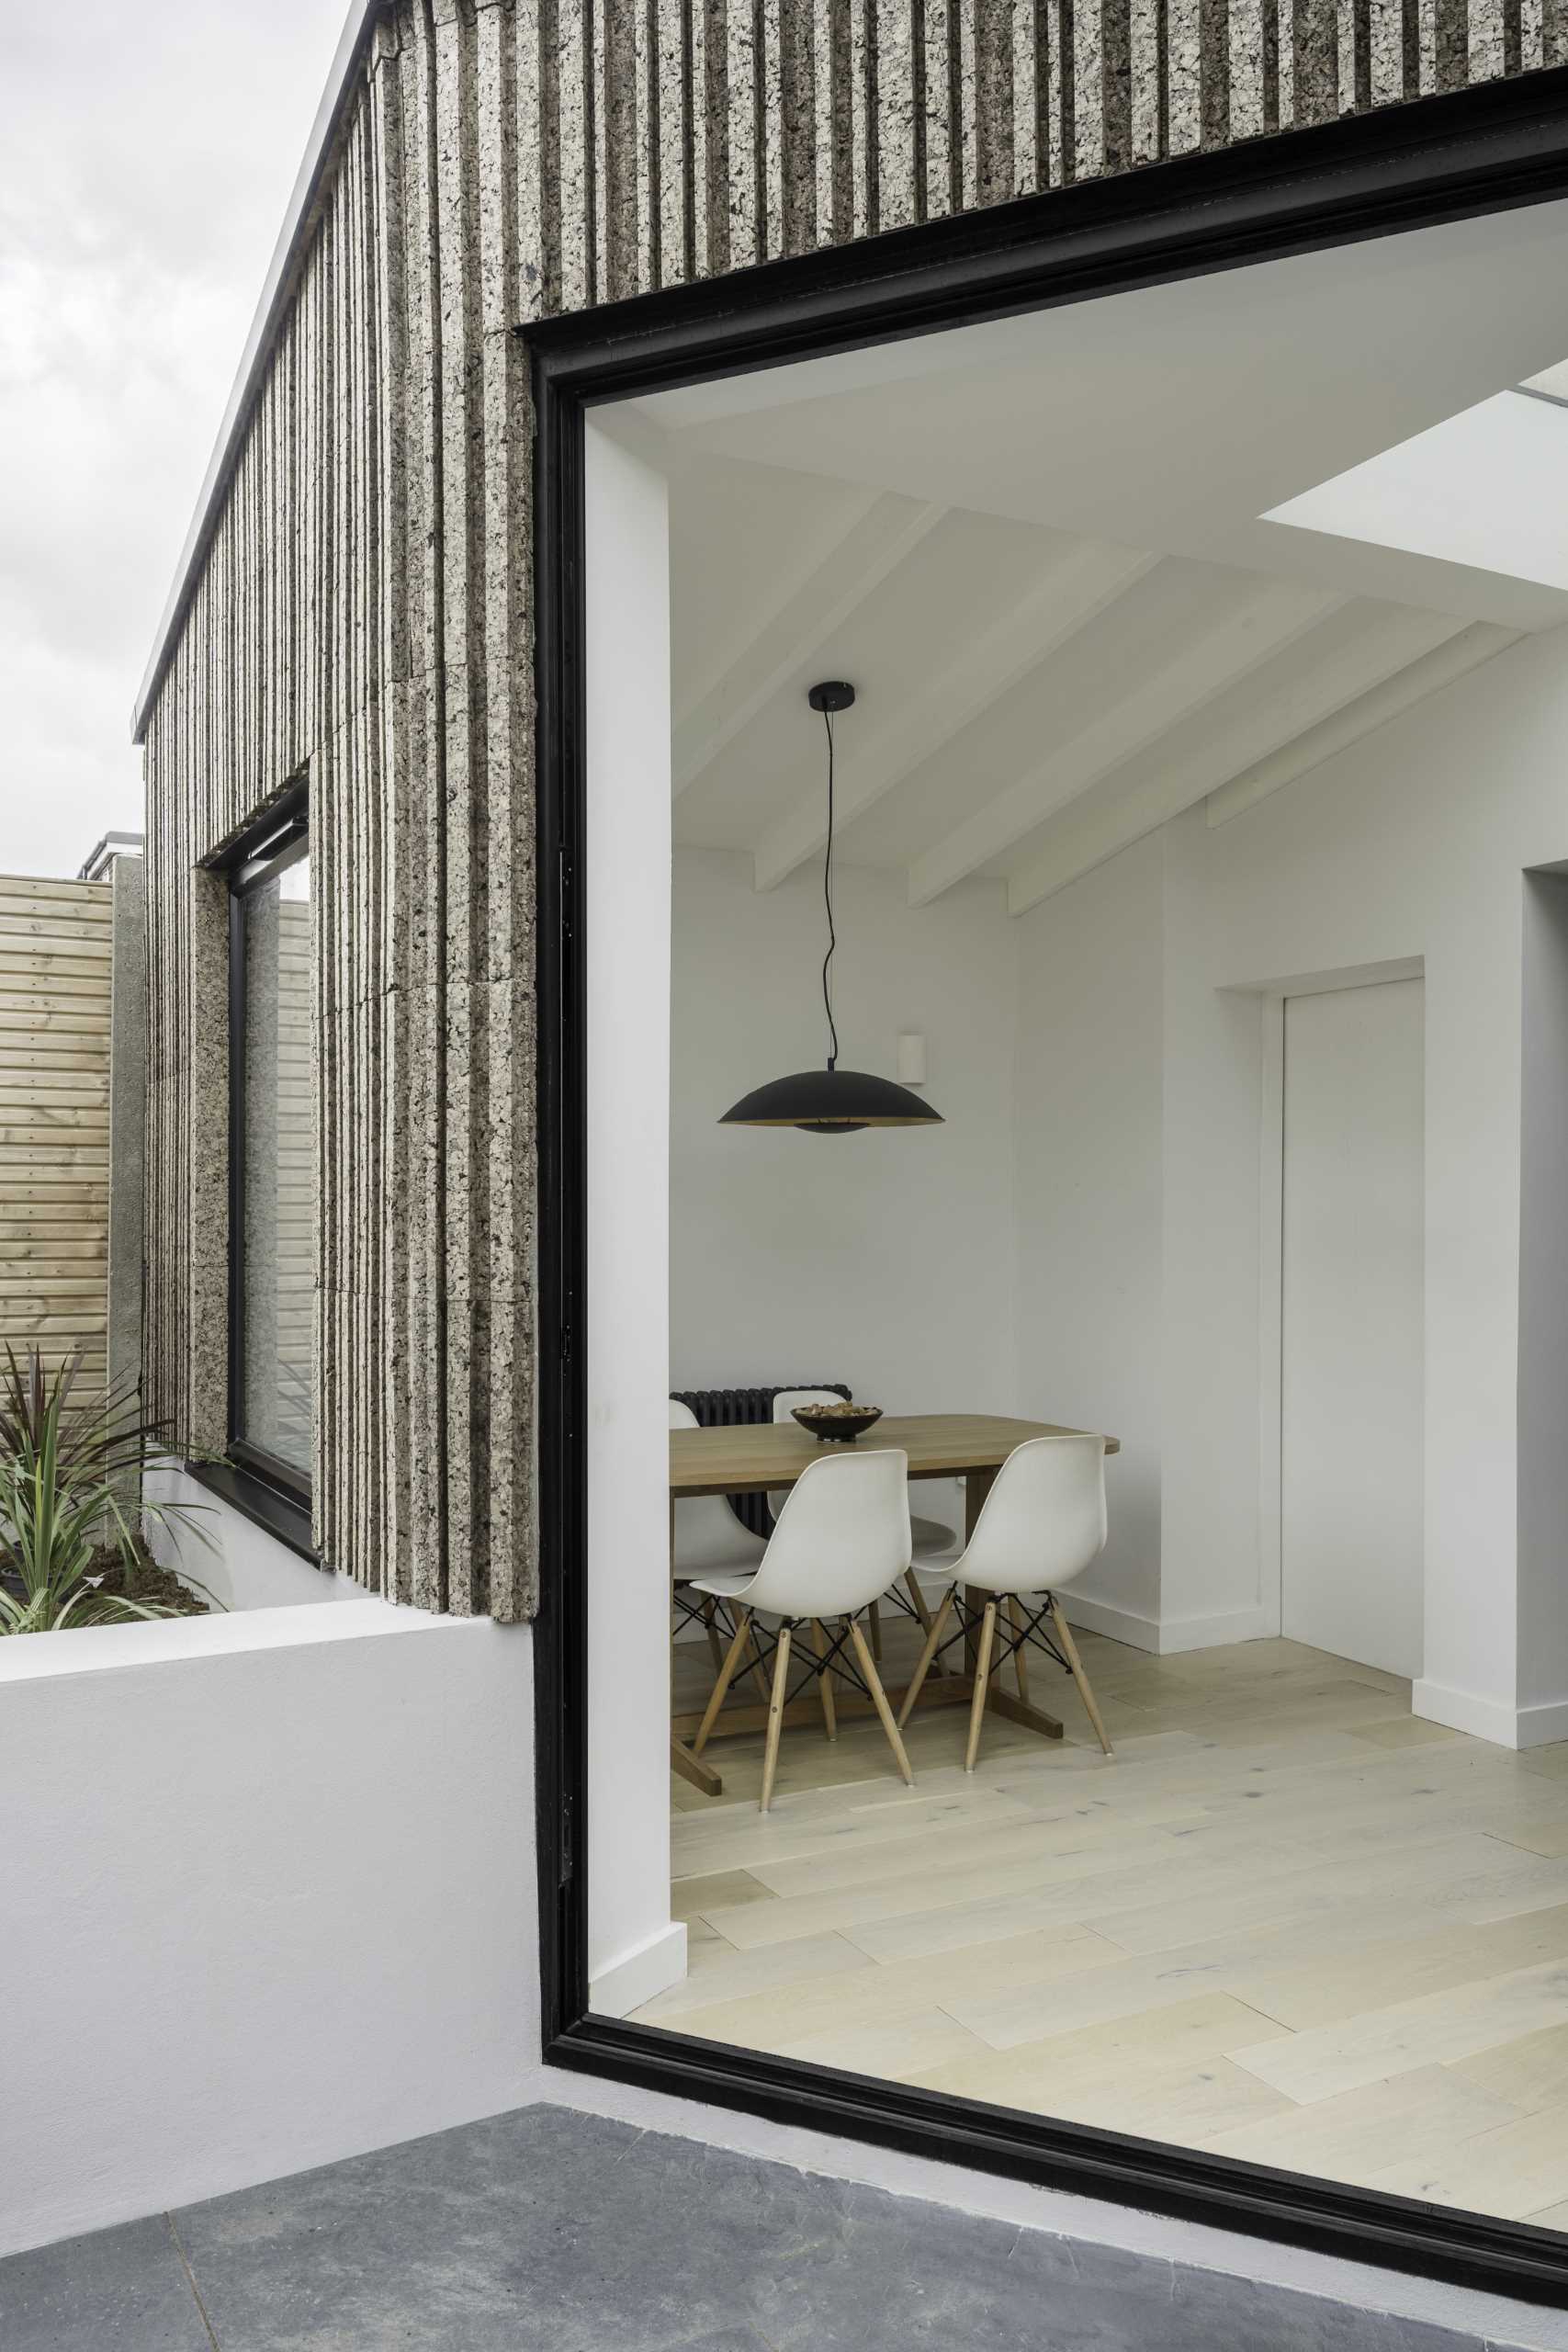 A modern home extension that's clad in patterned cork, includes new space for a dining area and kitchen.